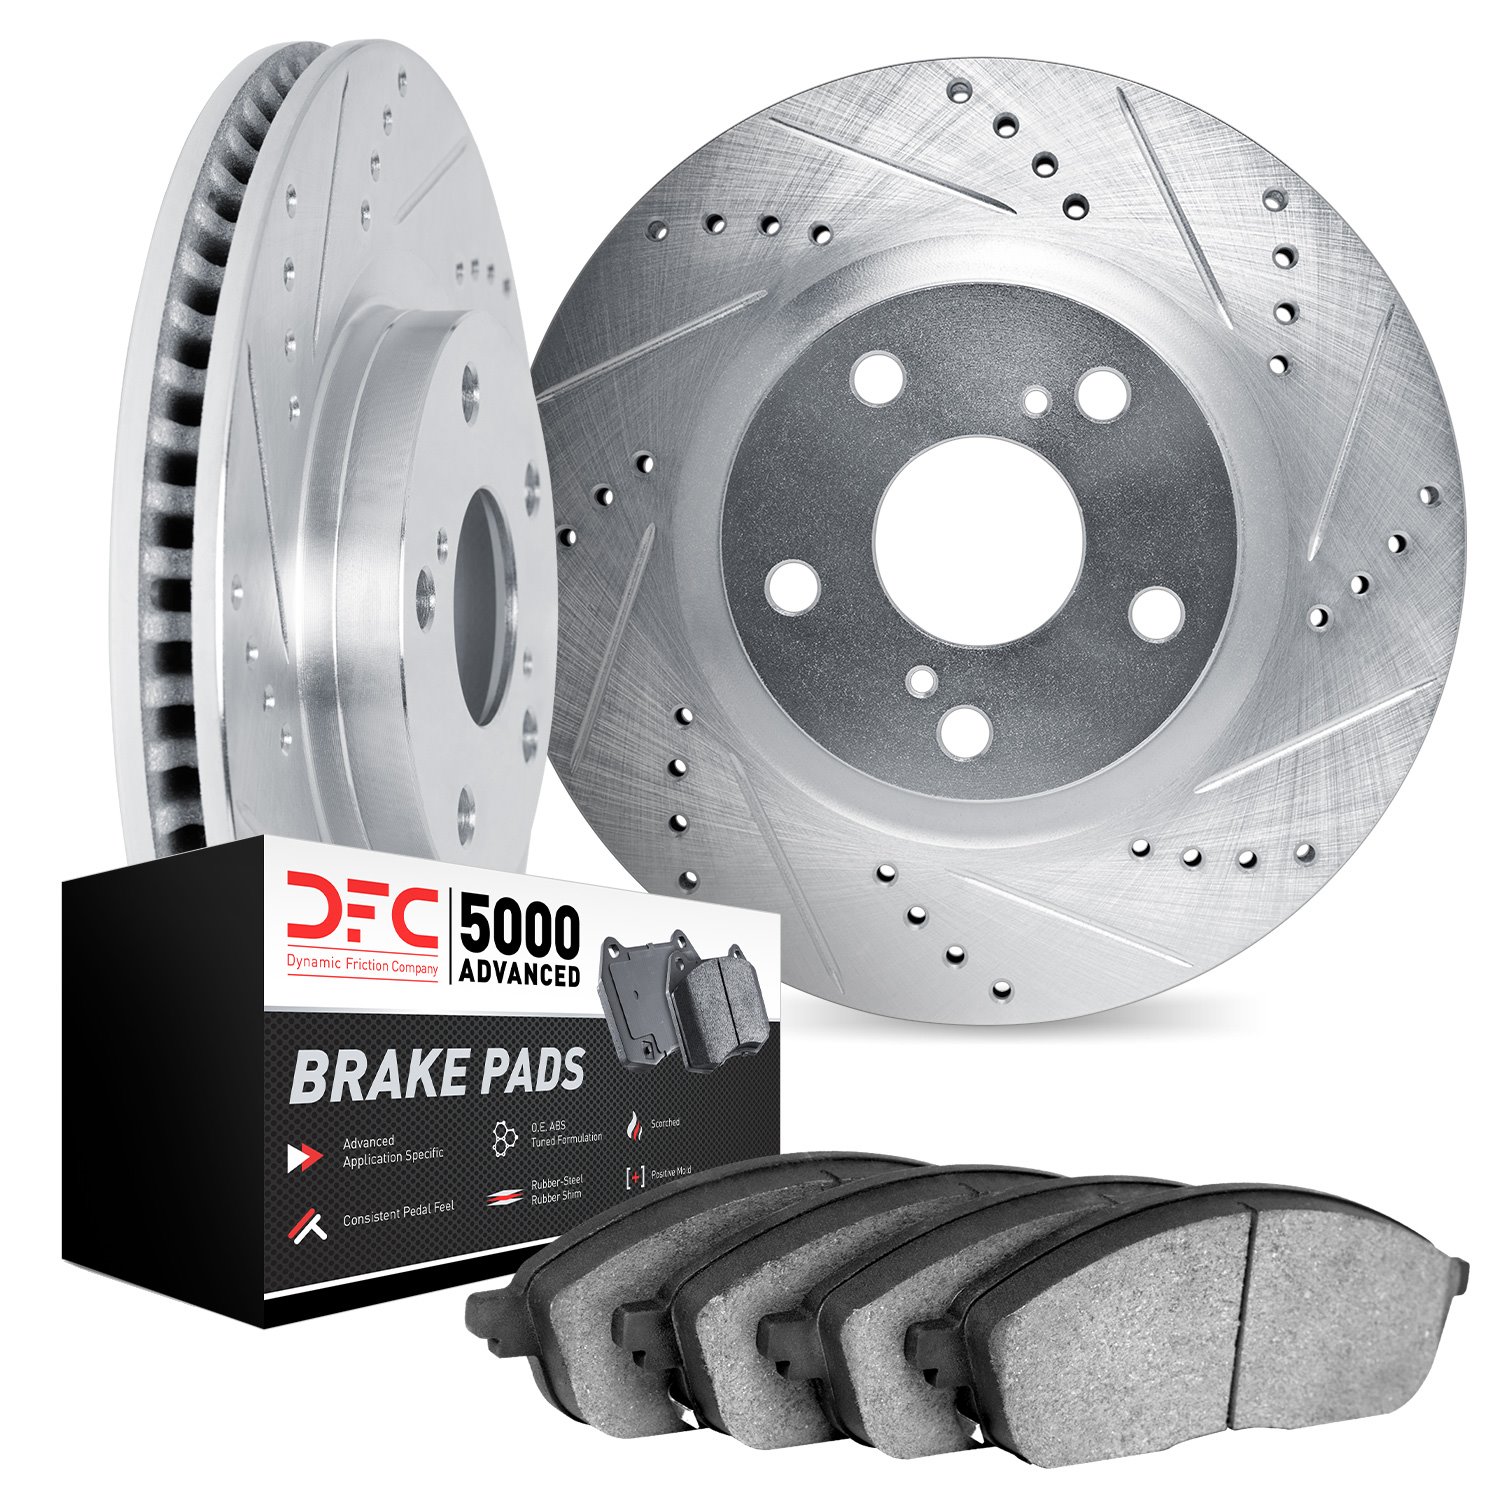 7502-80090 Drilled/Slotted Brake Rotors w/5000 Advanced Brake Pads Kit [Silver], Fits Select Ford/Lincoln/Mercury/Mazda, Positio